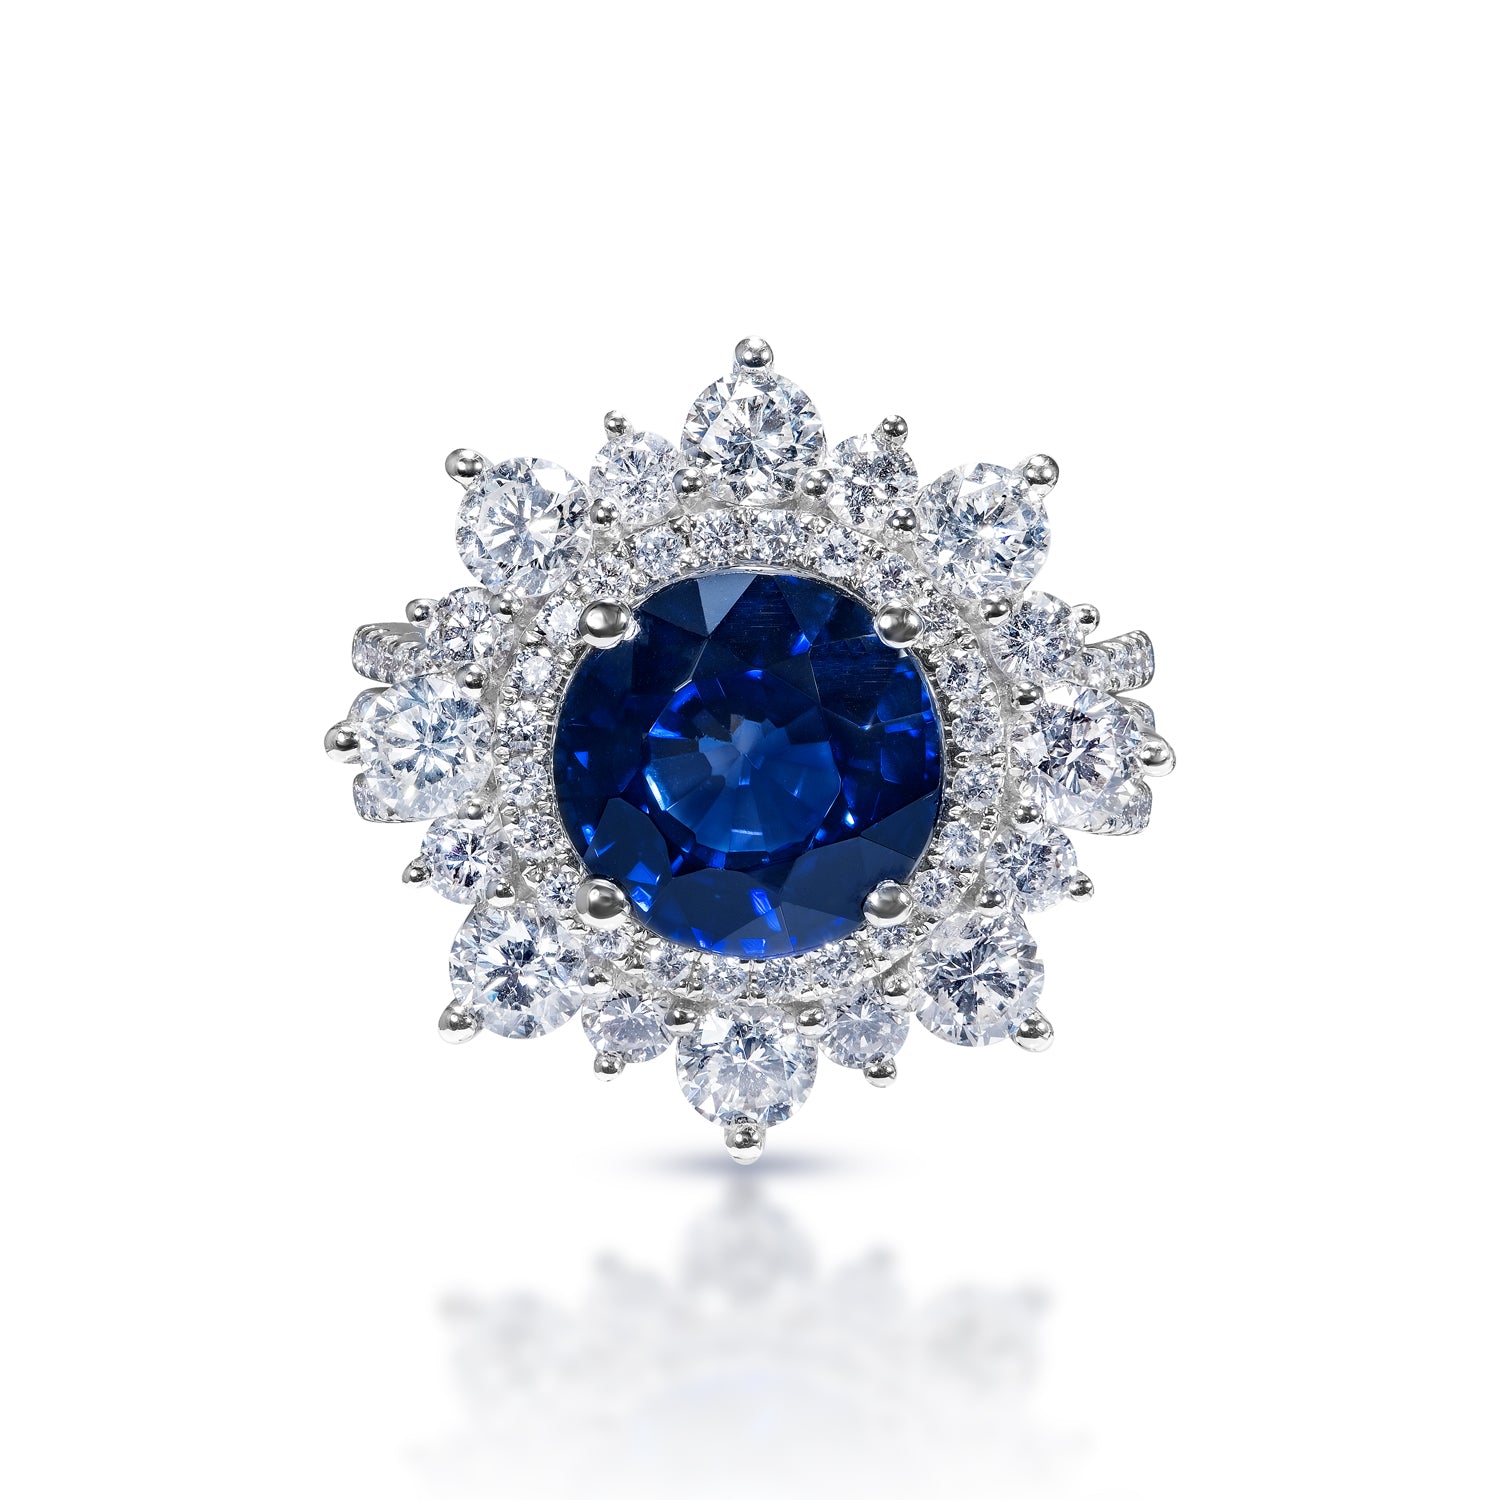 Evie 7 Carats Round Brilliant Blue Sapphire Ring in 18k White Gold Front View